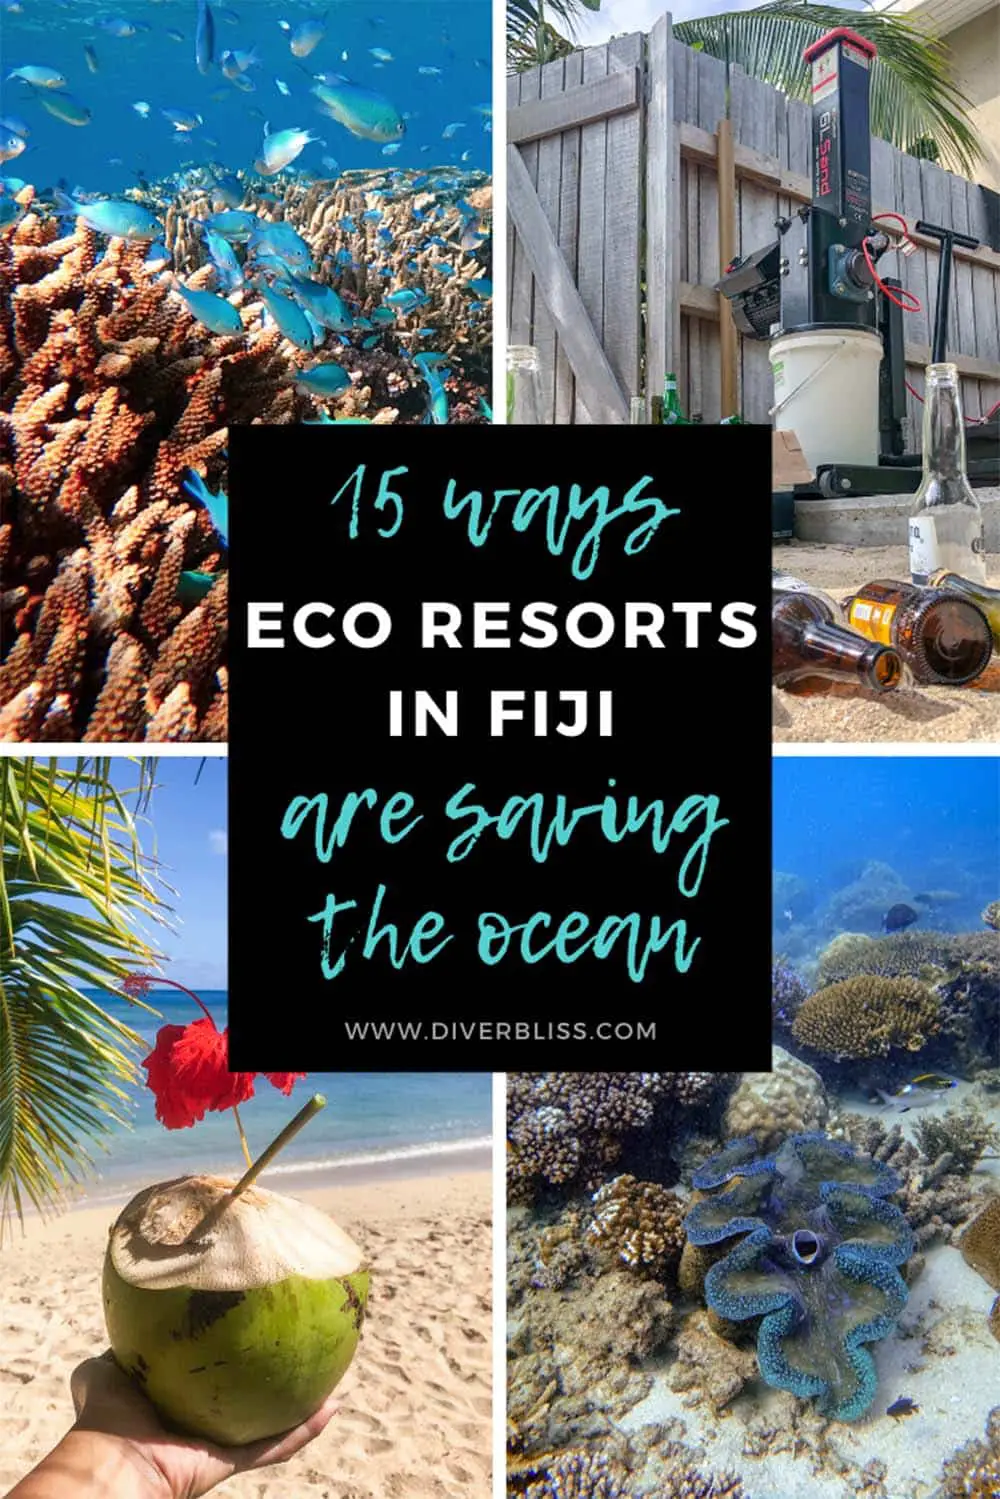 15 of the Best Ways Eco Resorts in Fiji are Helping Save our Oceans